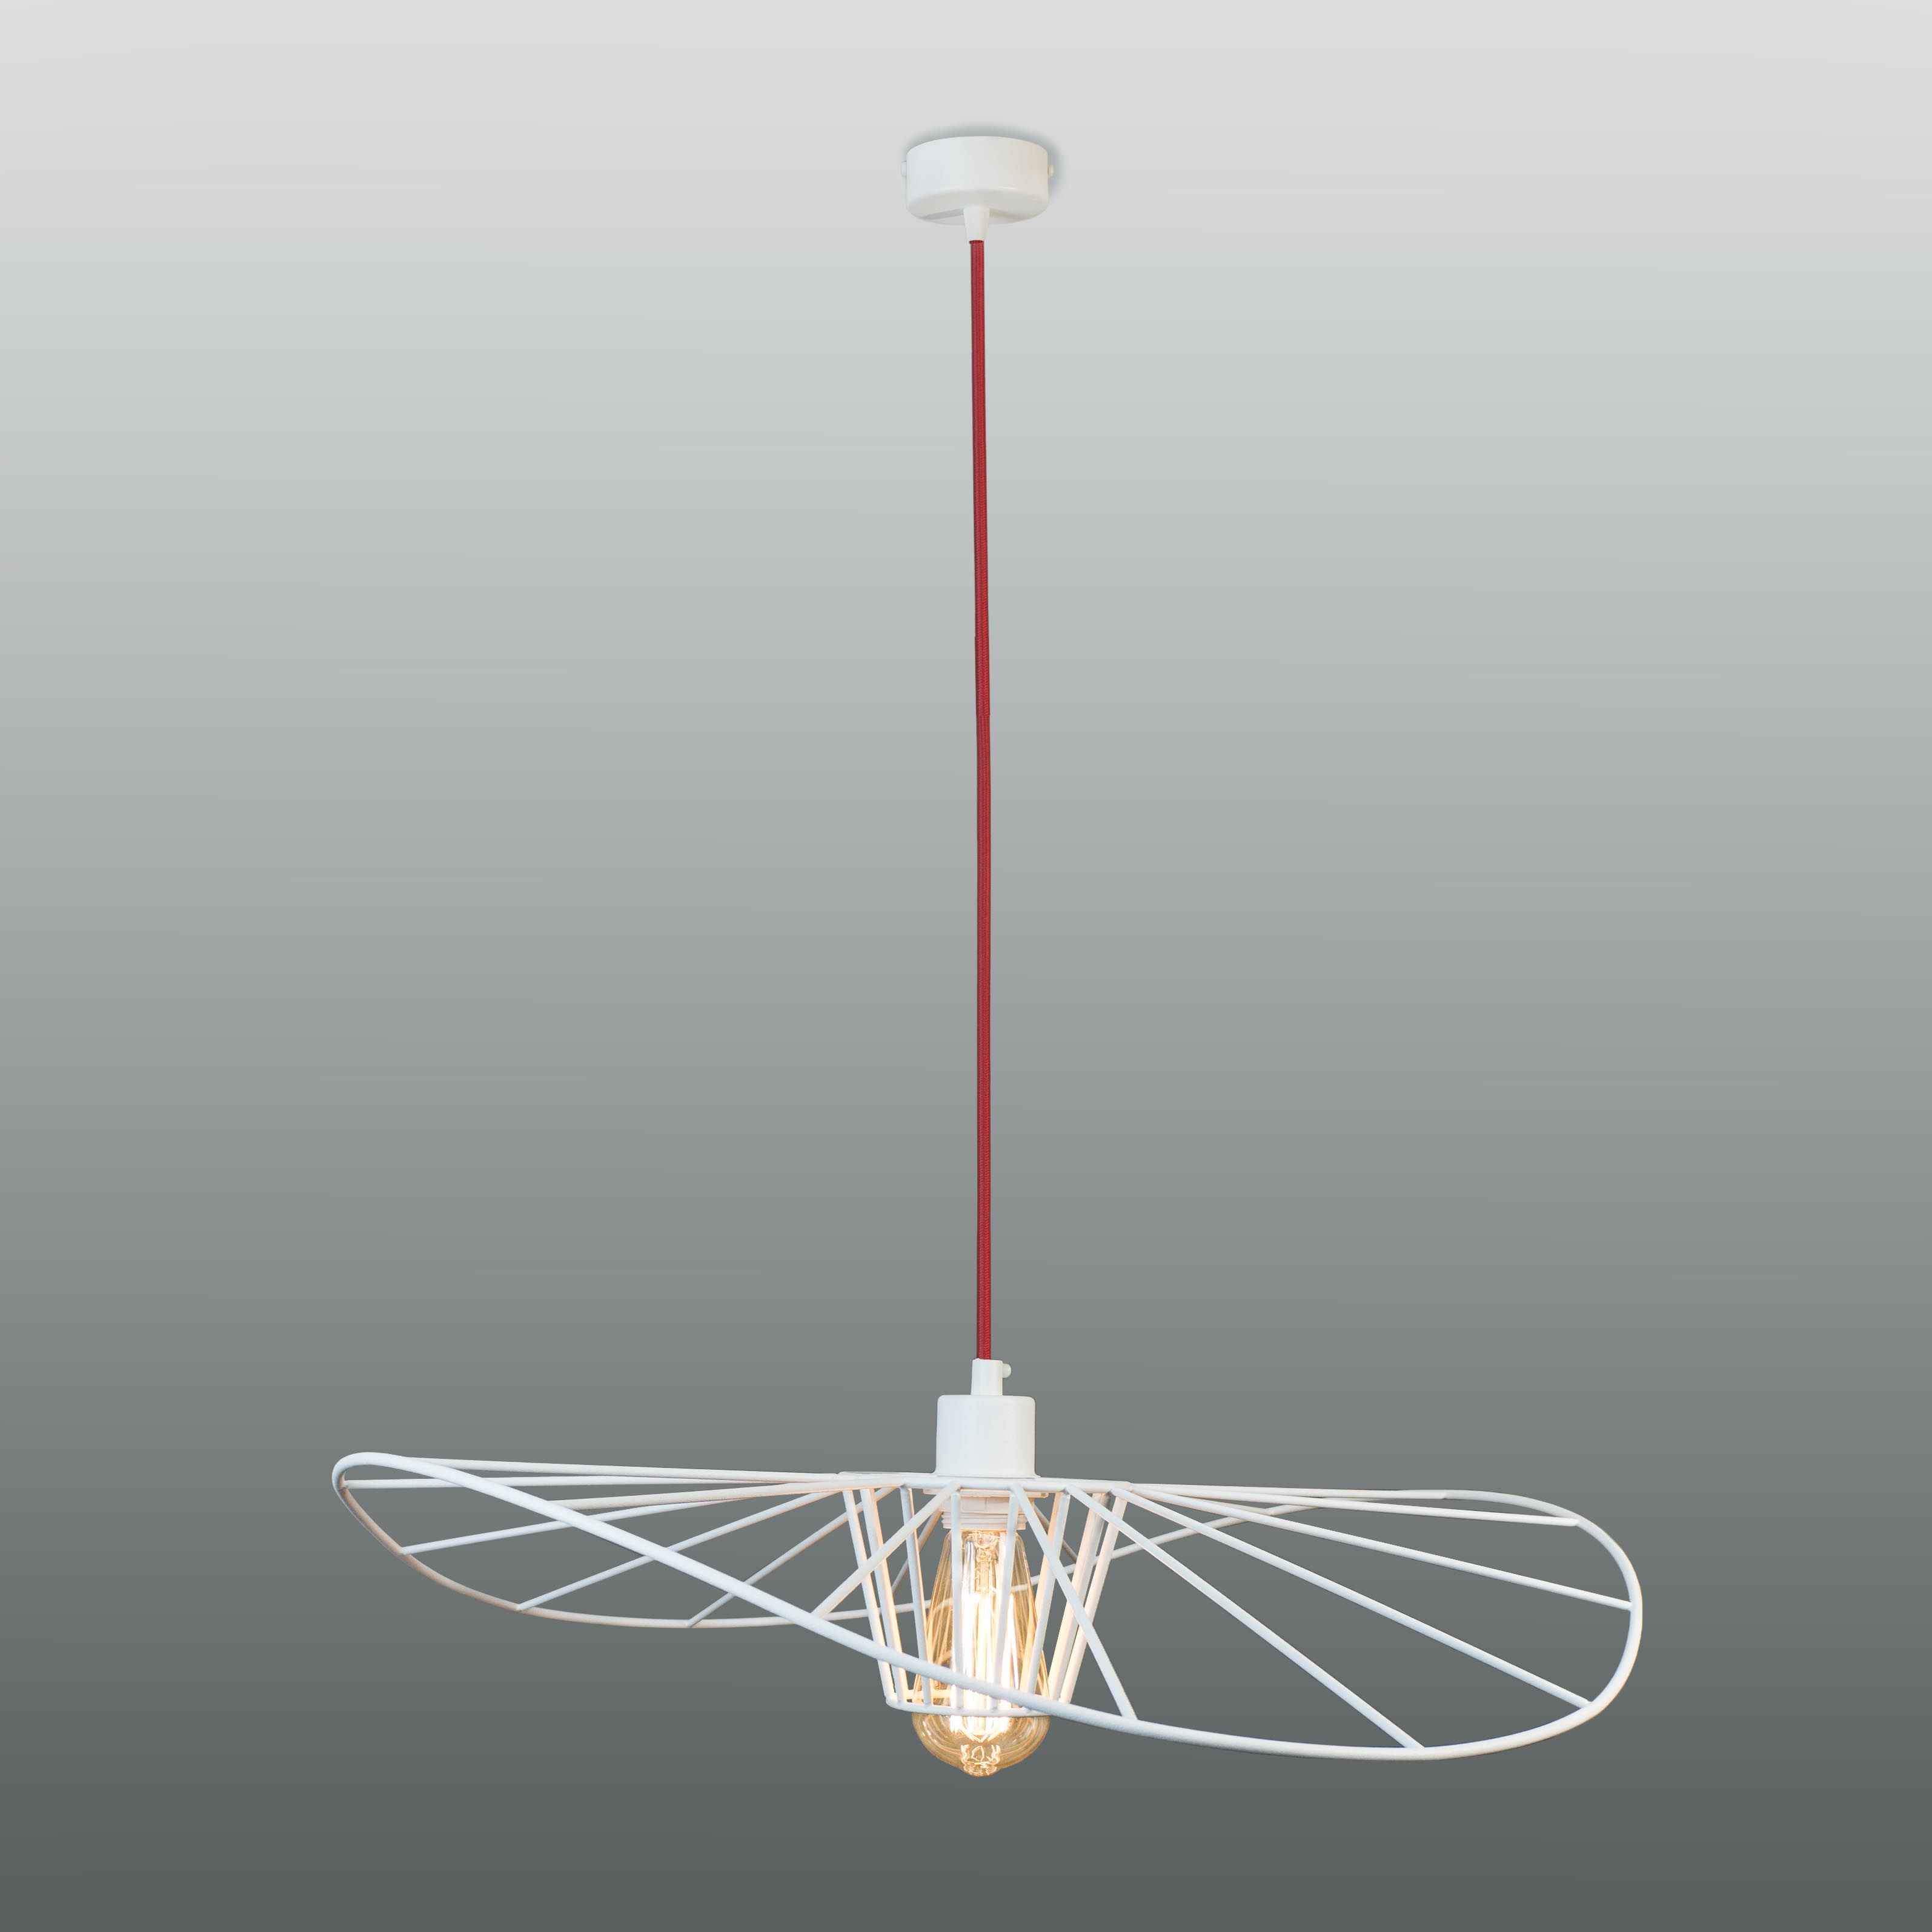 Suspension lamp Lady white / red